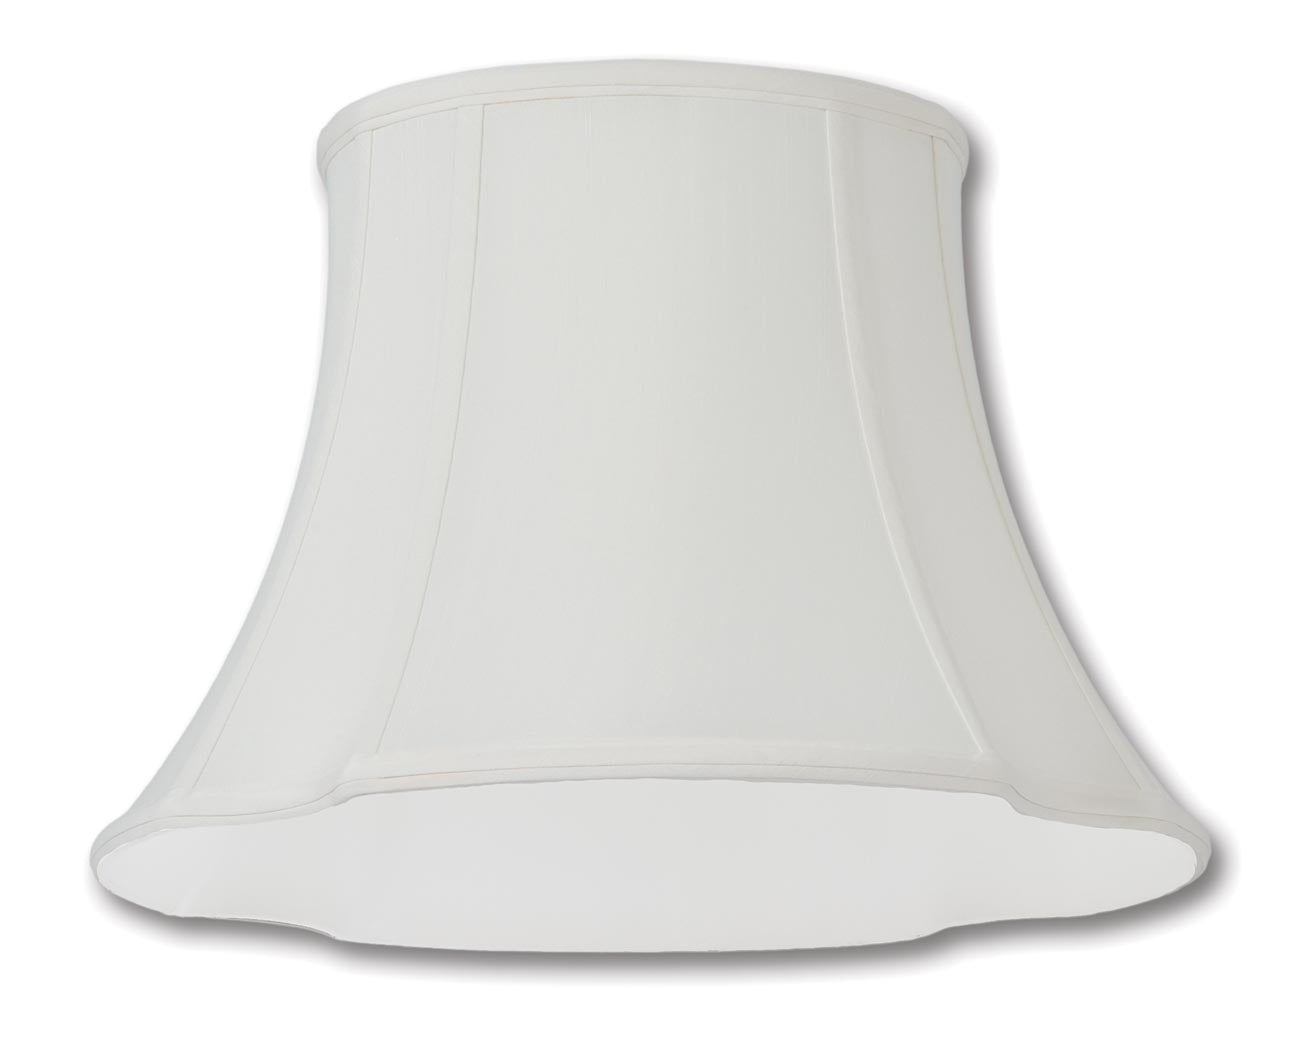 French Oval Lamp Shades - Off White Tissue Shantung Material